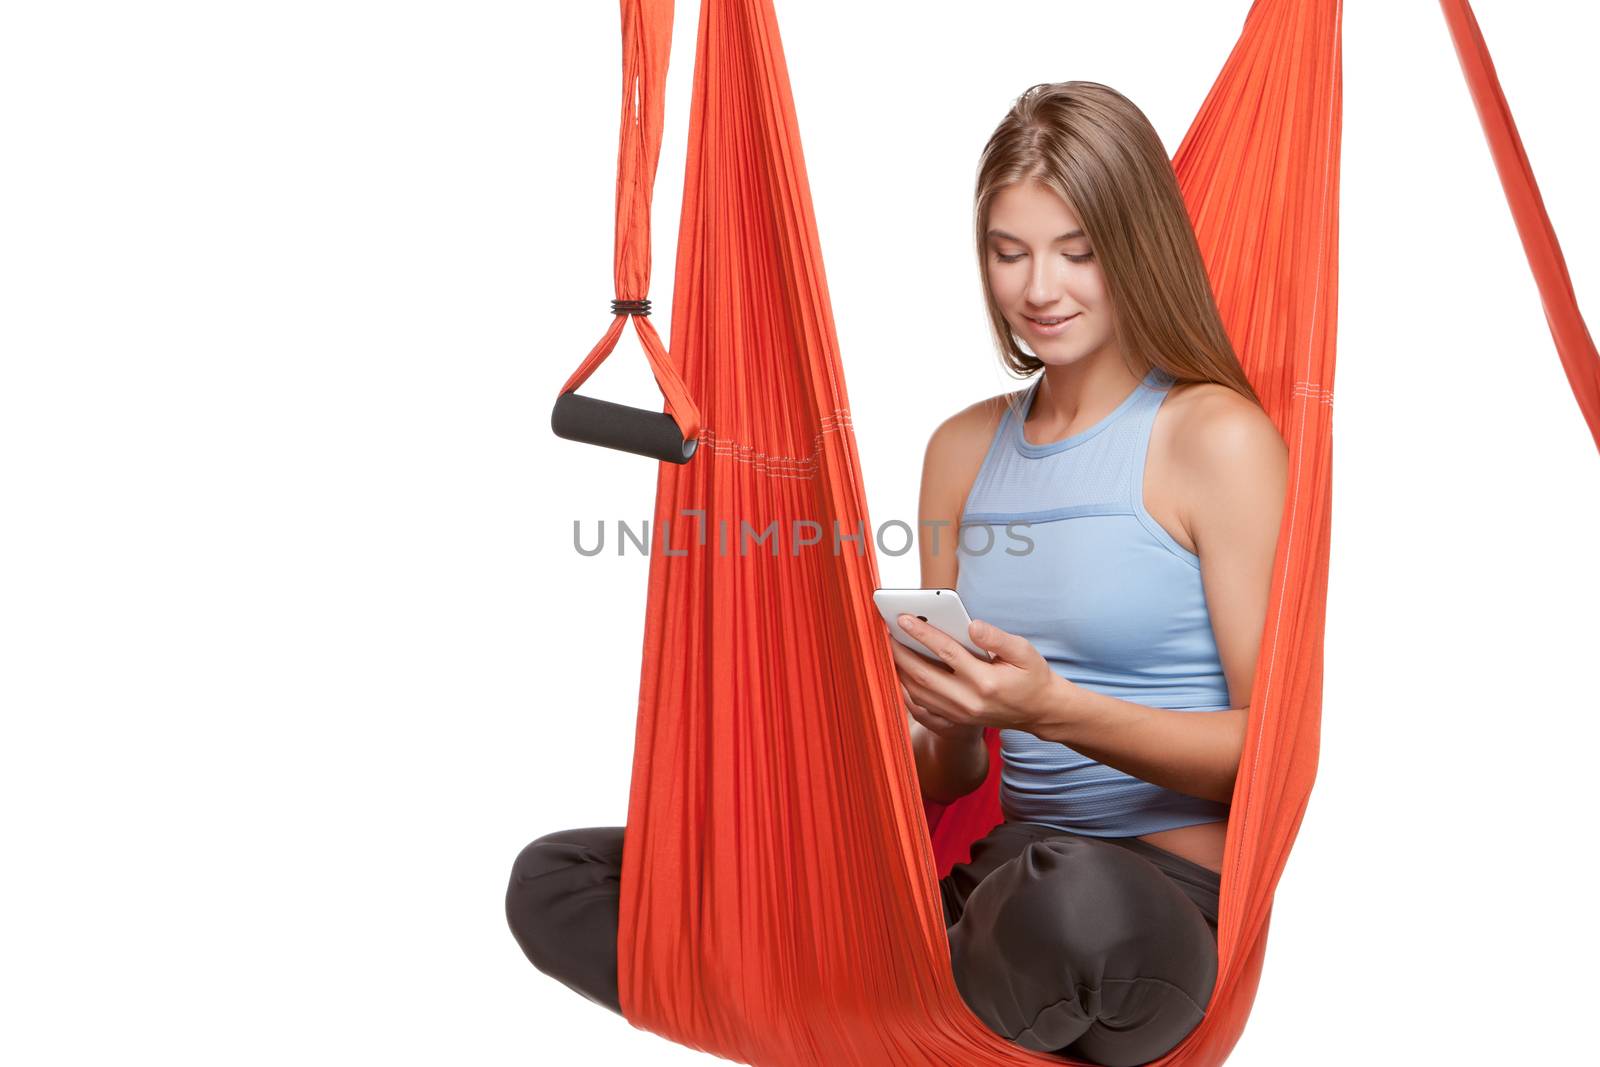 Young woman sitting in red hammock for anti-gravity aerial yoga with phone on a white background.